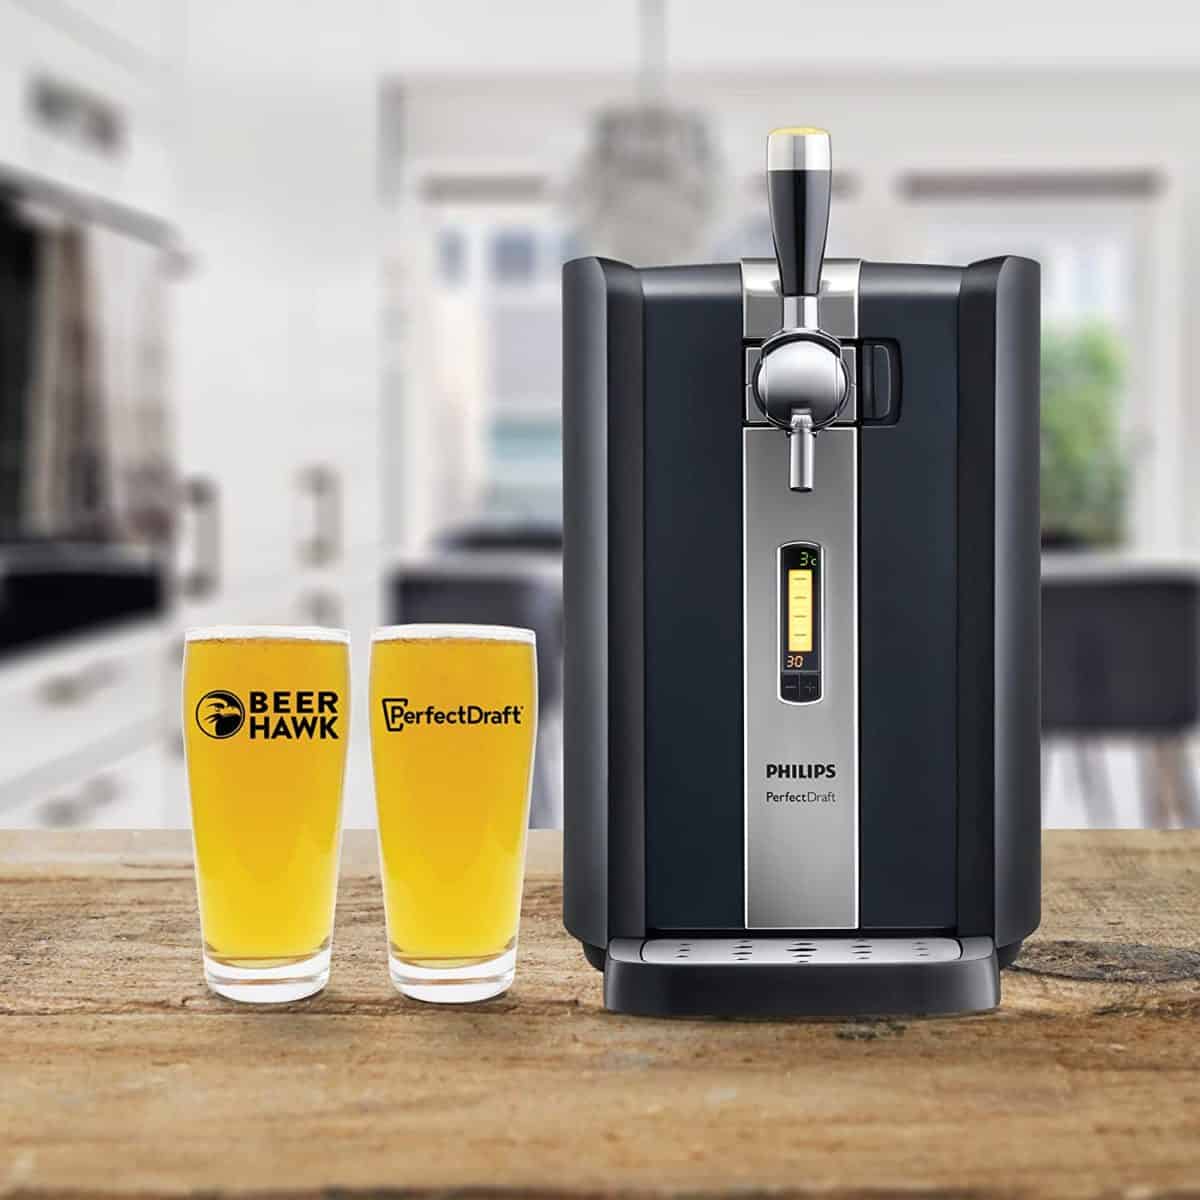 https://www.wepc.com/wp-content/uploads/2022/06/Beer-dispenser-Prime-Day-deals-2022-Draught-beer-machine-from-the-home-e1655913156419.jpg